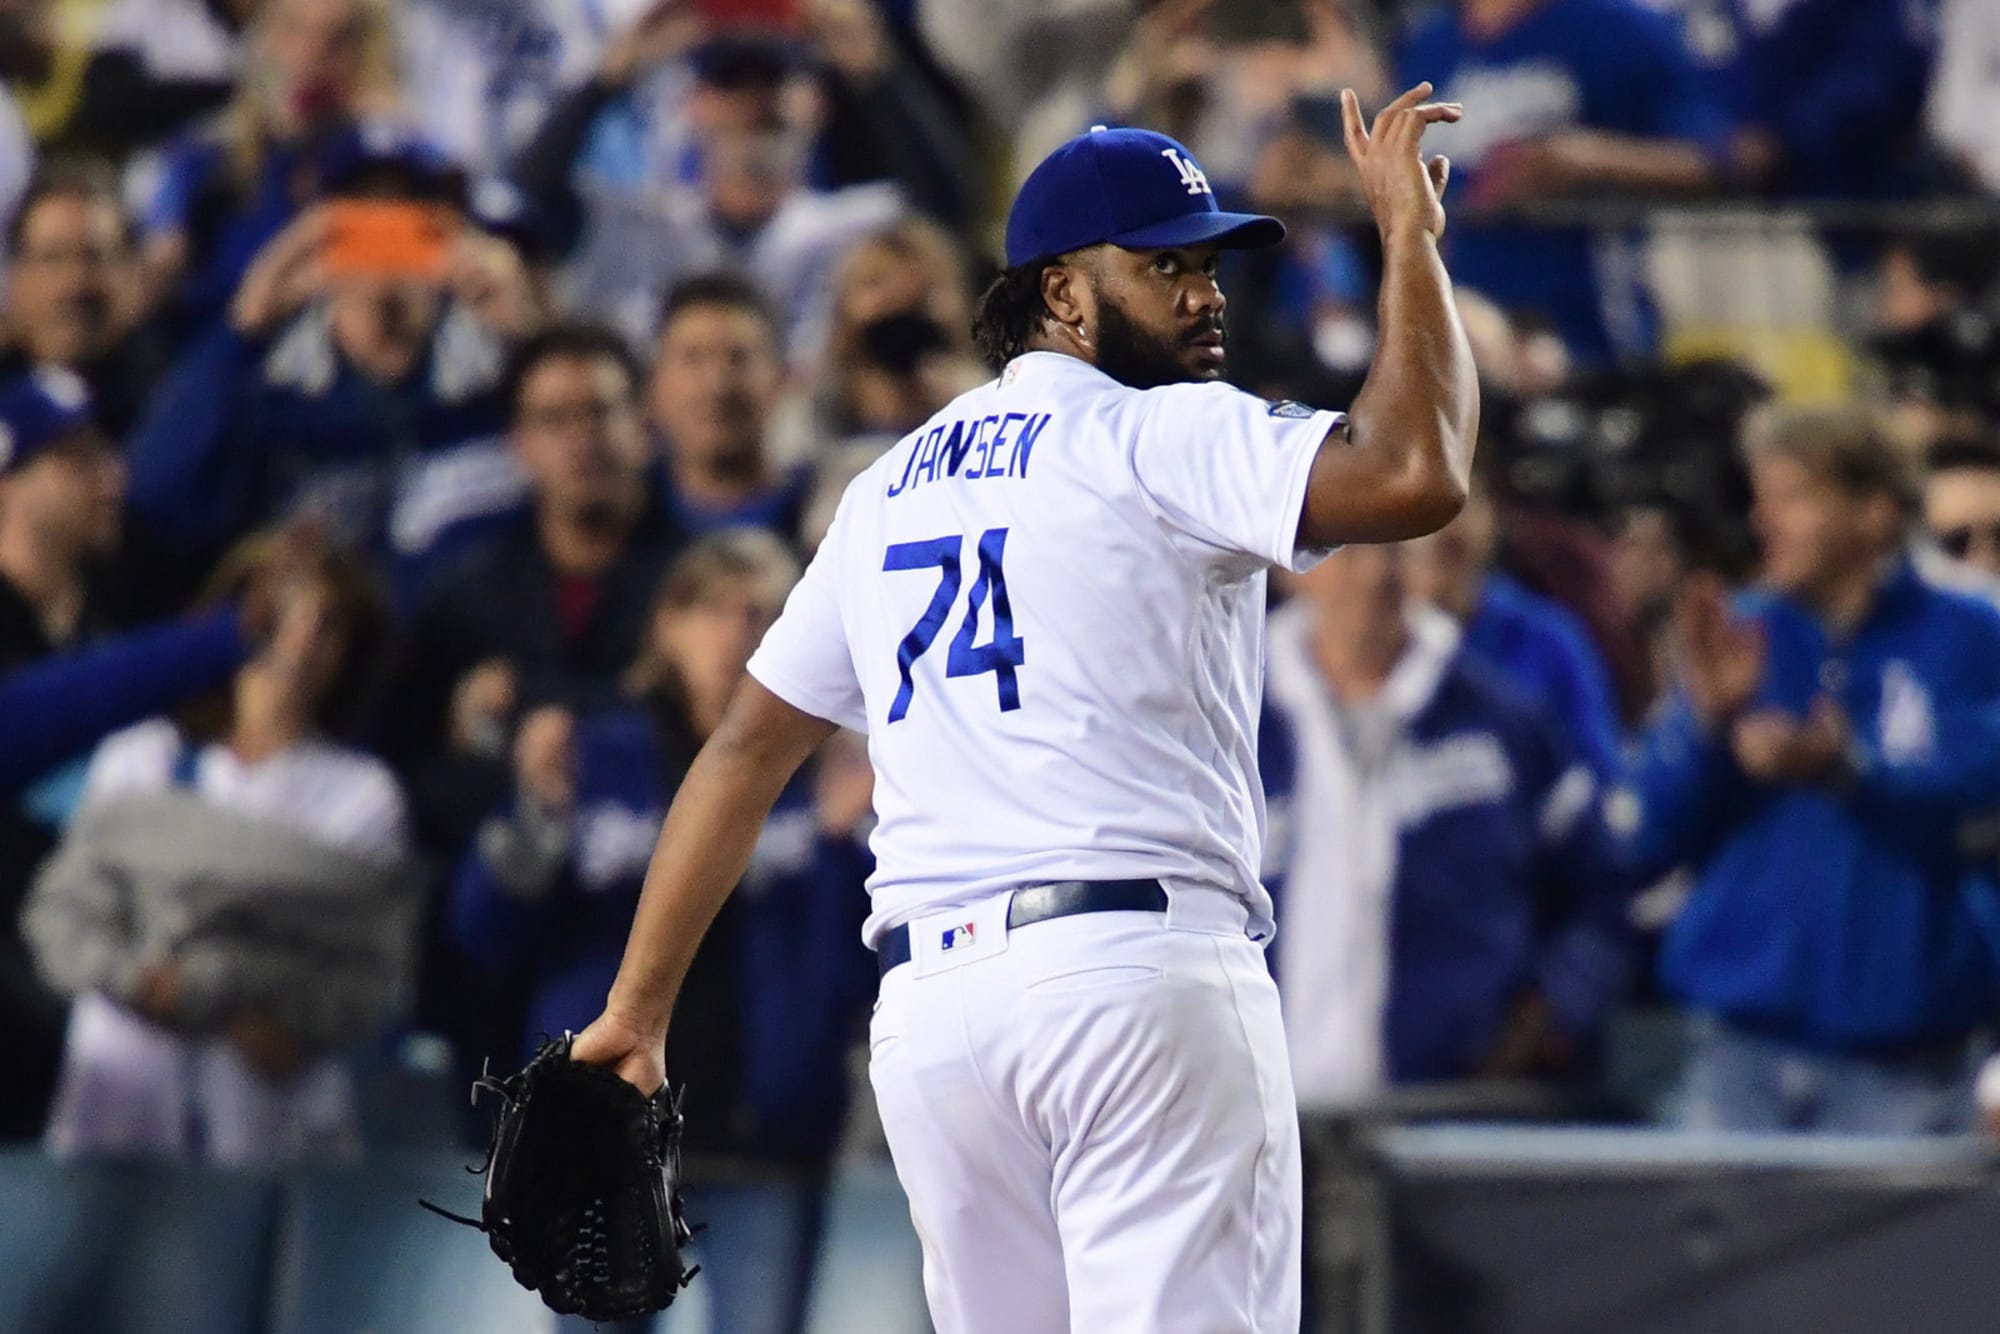 Not in Hall of Fame - 37. Kenley Jansen